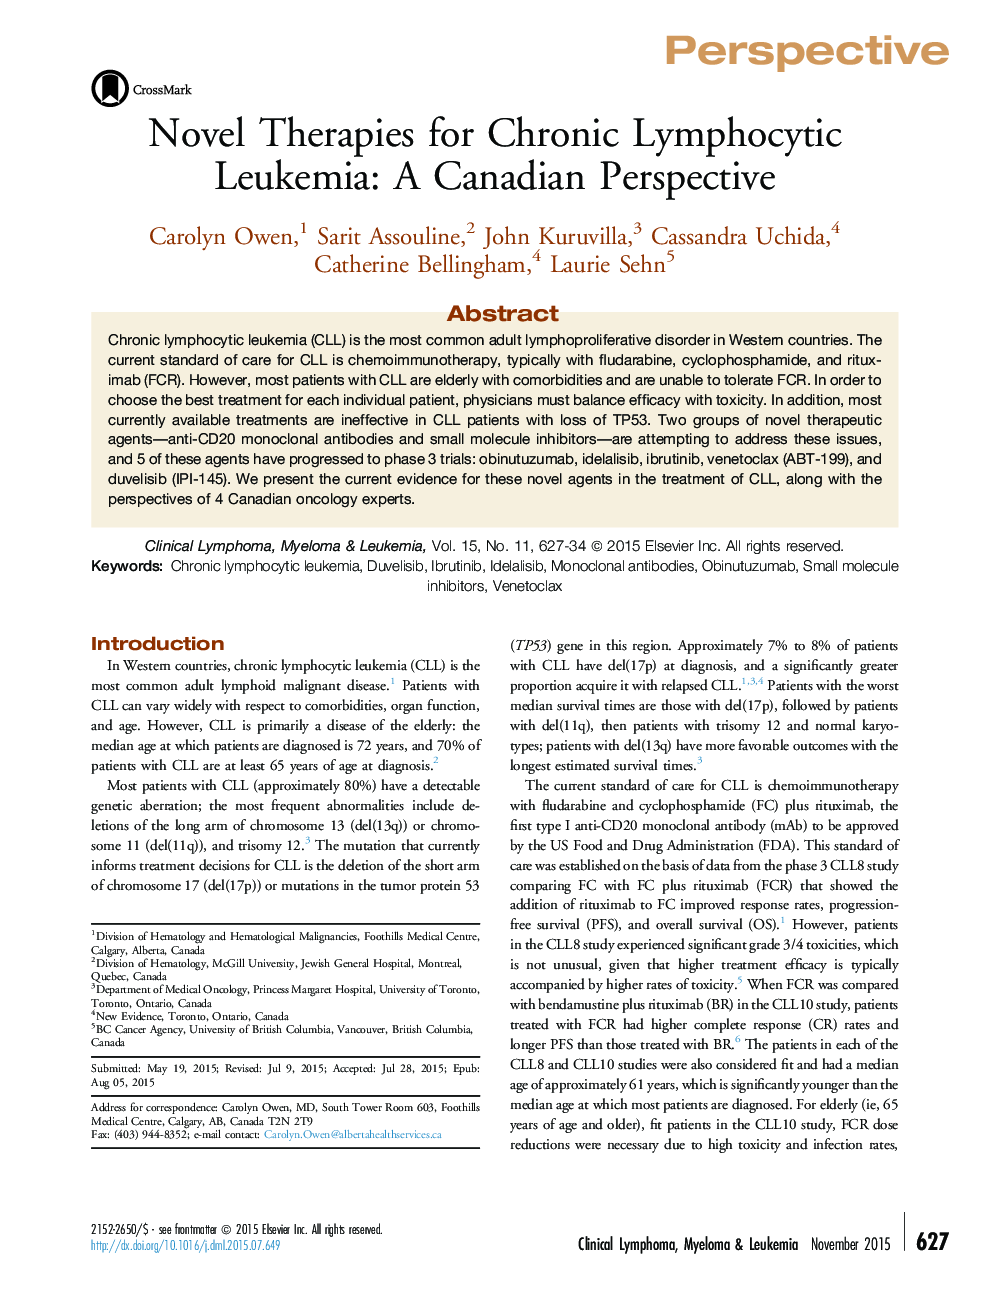 Novel Therapies for Chronic Lymphocytic Leukemia: A Canadian Perspective